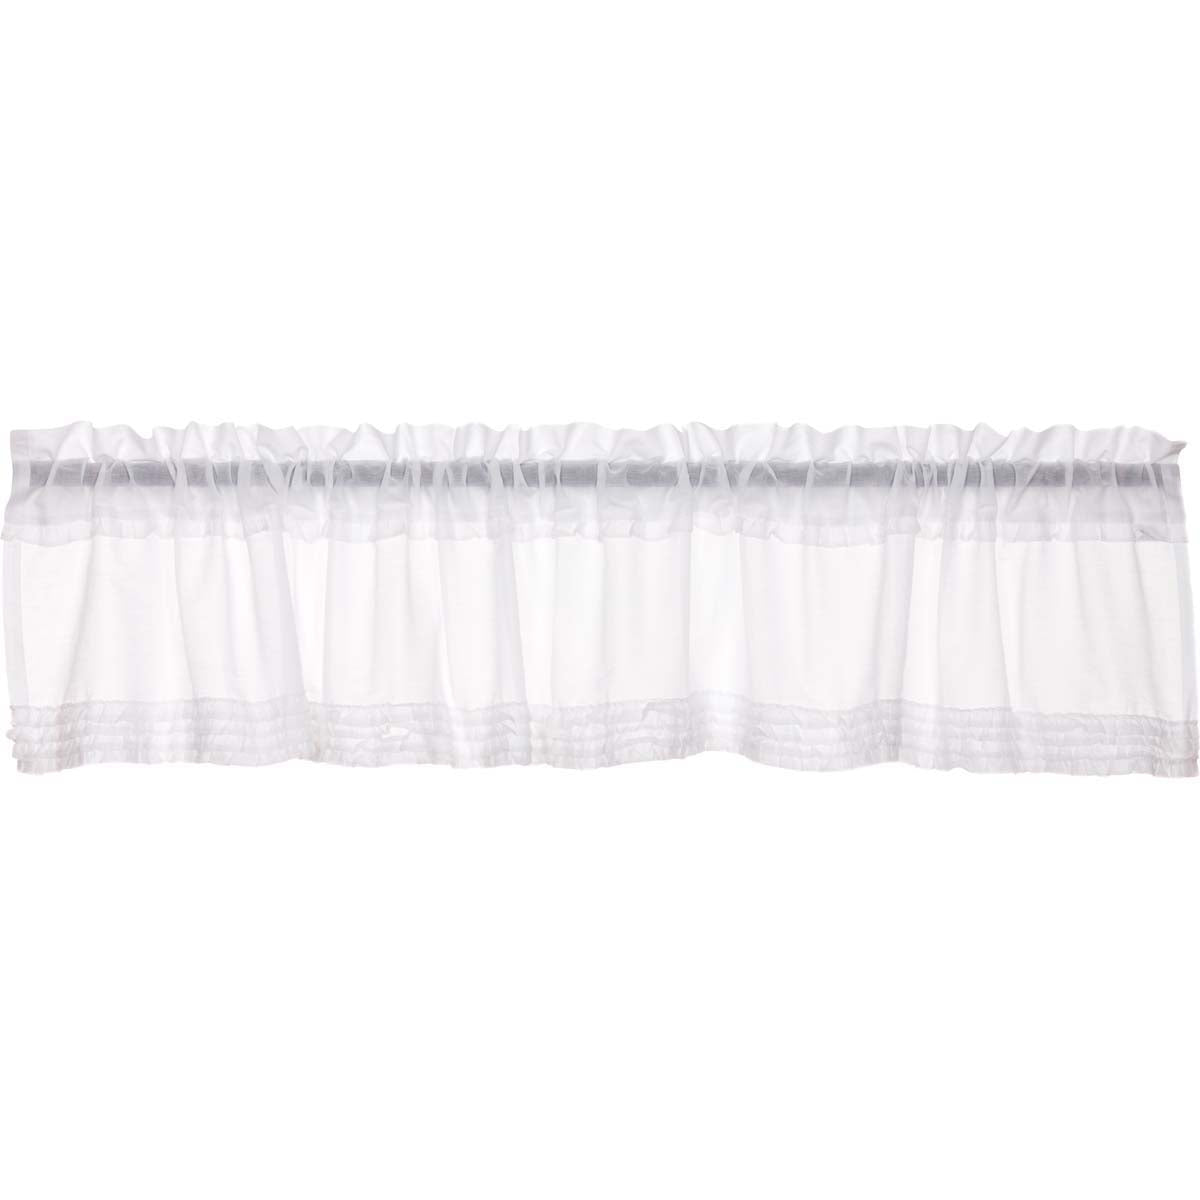 April & Olive White Ruffled Sheer Valance 16x90 By VHC Brands